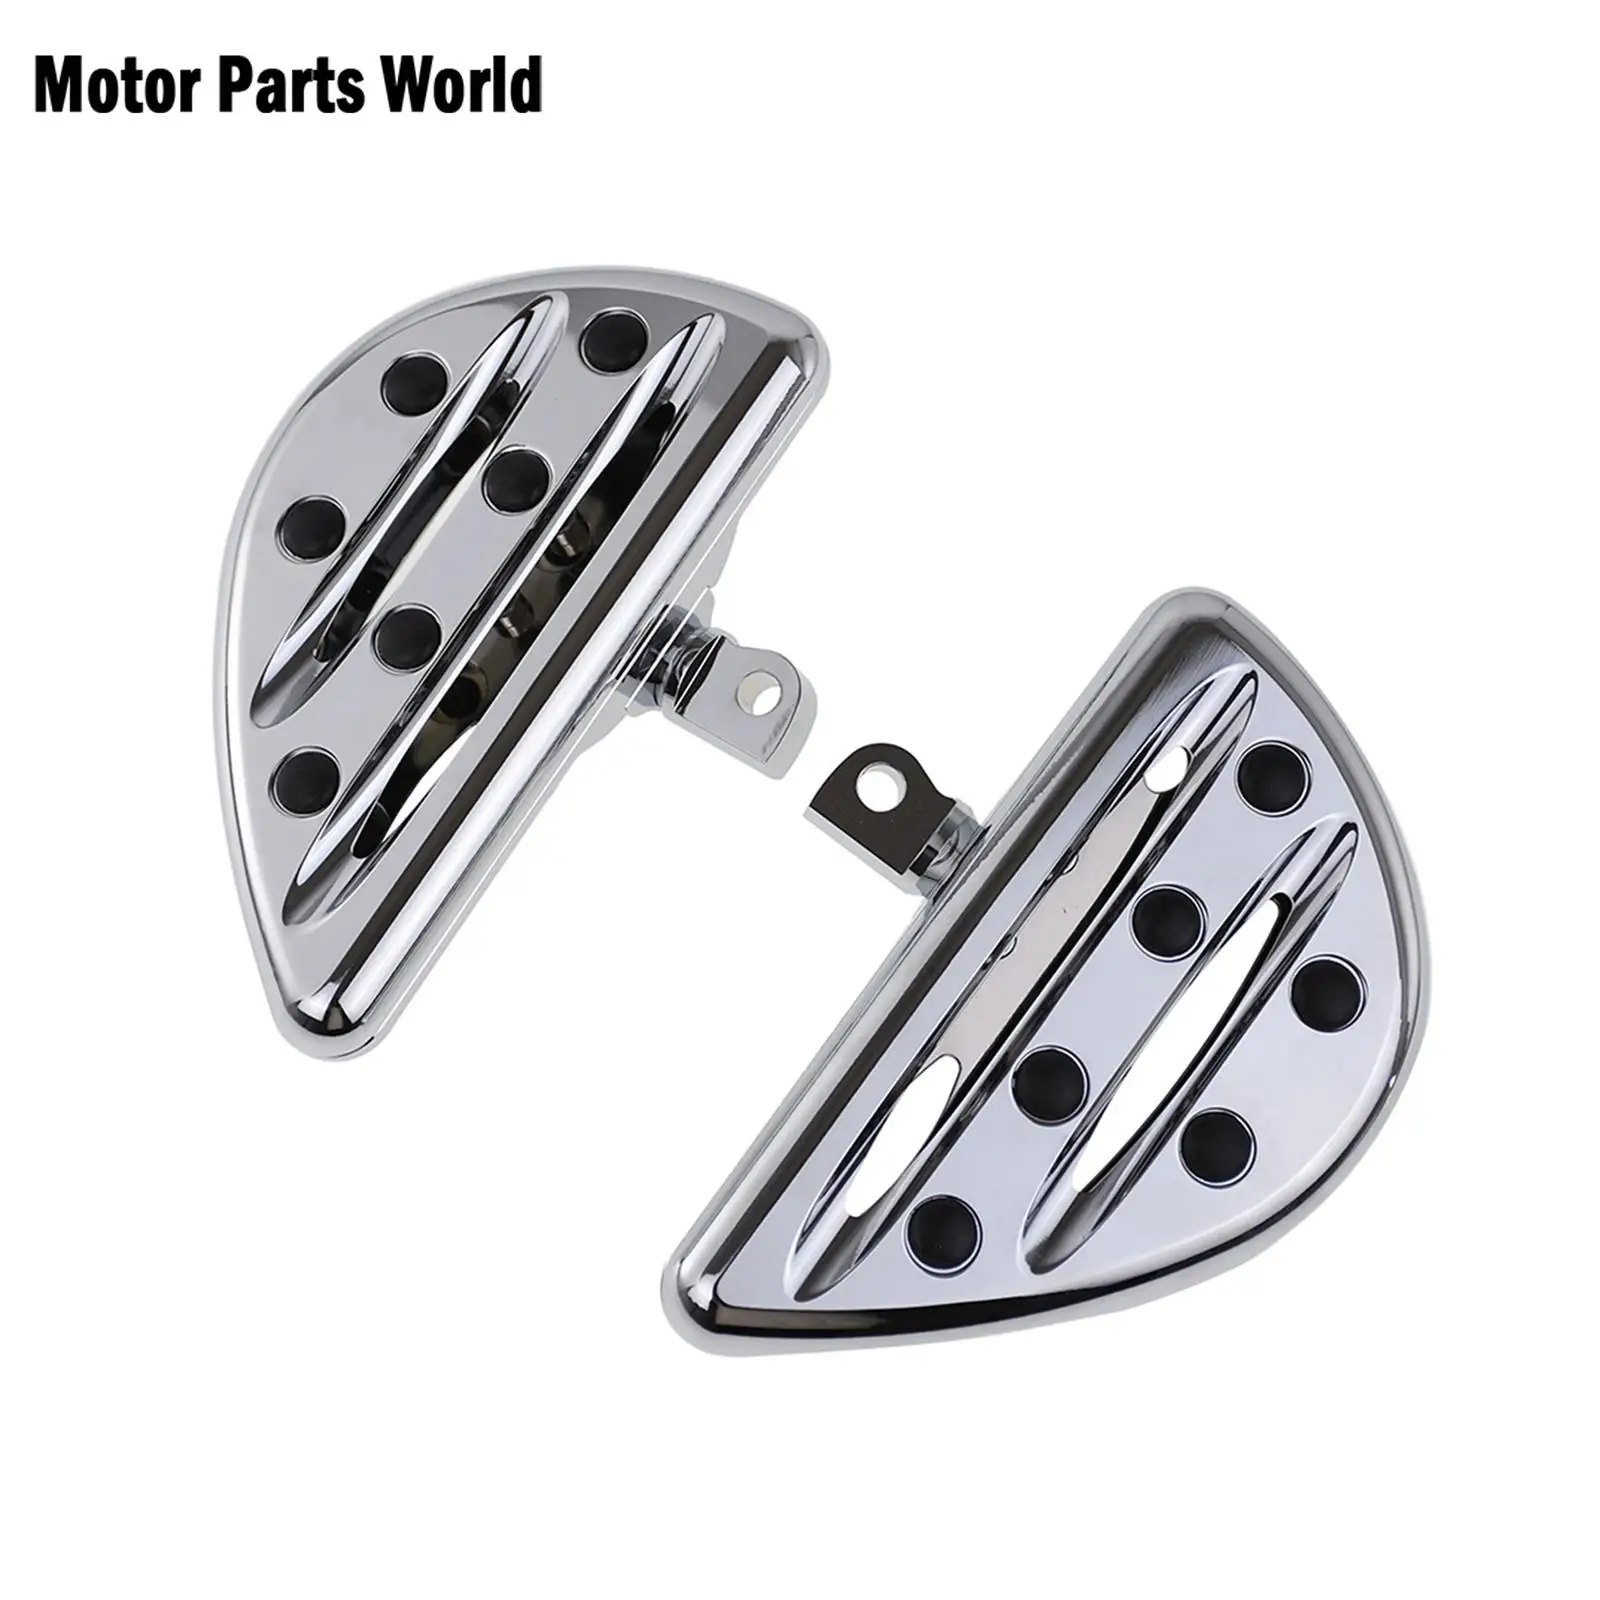 

Motorcycle Rear Passenger Floorboards Footboard Pedal Foot Pegs Chrome For Harley Touring Road Glide Softail Dyna Sportster XL